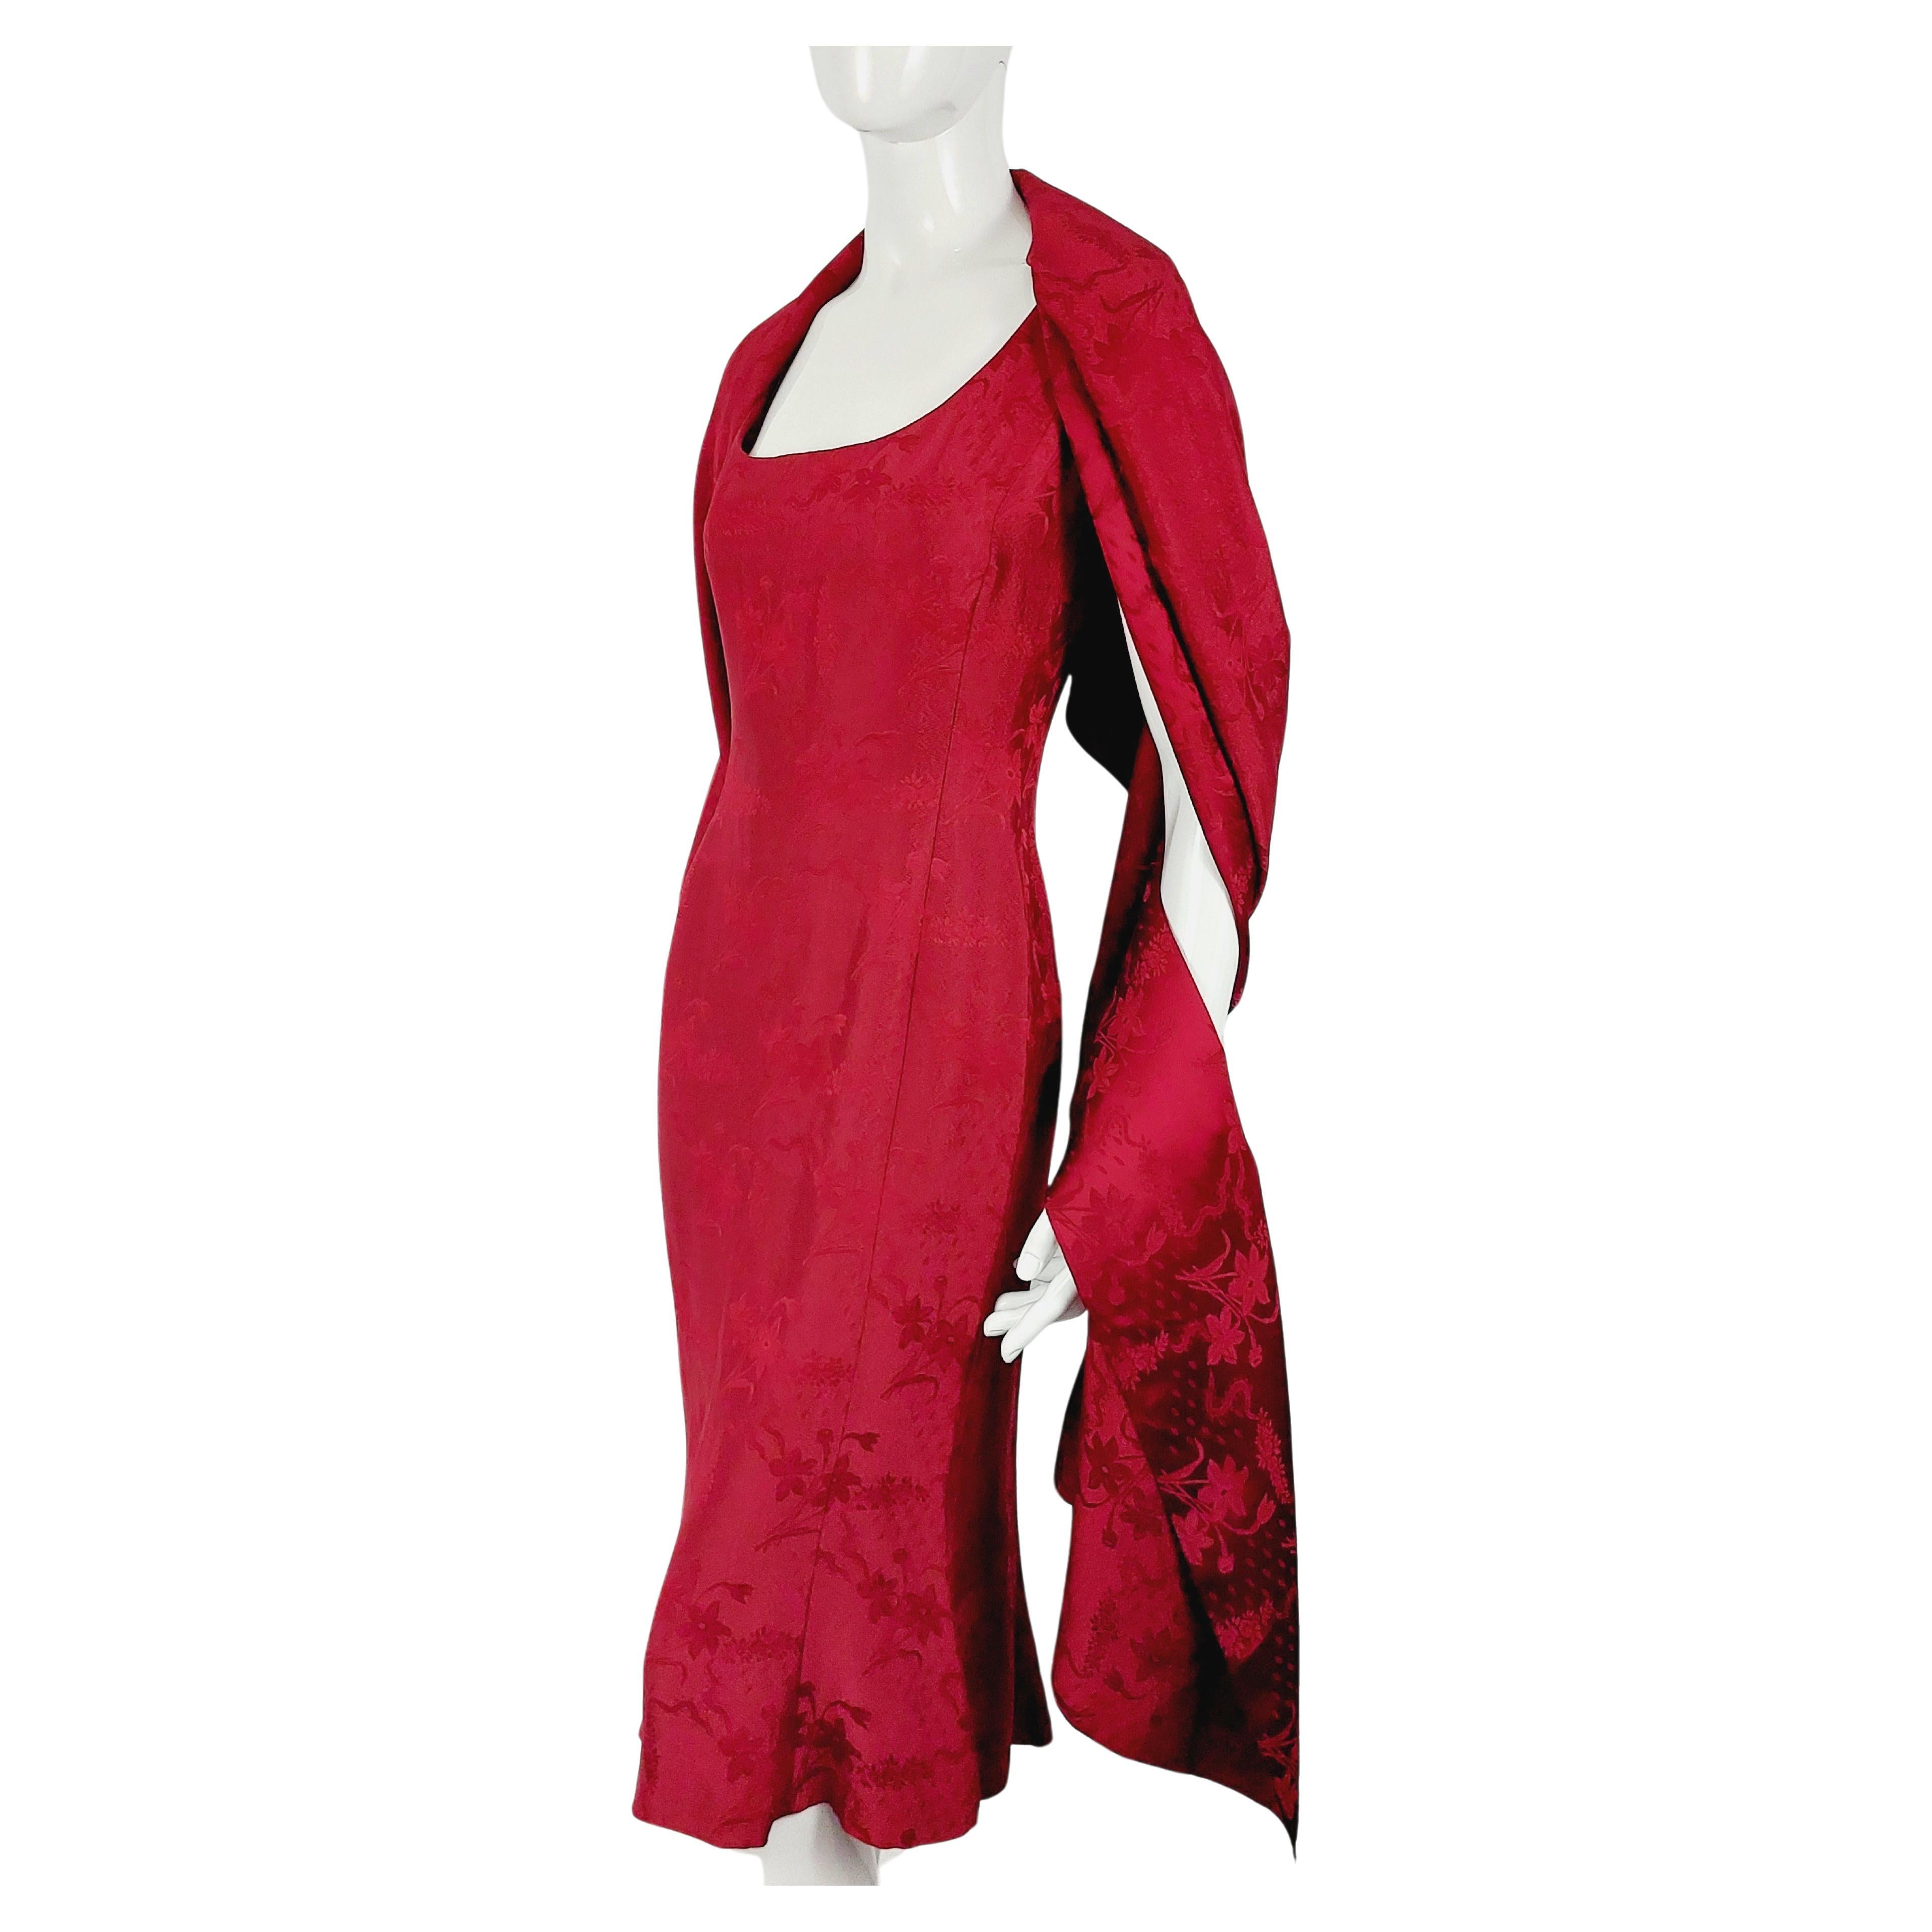 John Galliano London Red Silk Brocade Floral Runway Evening Gown Dress w Stola For Sale